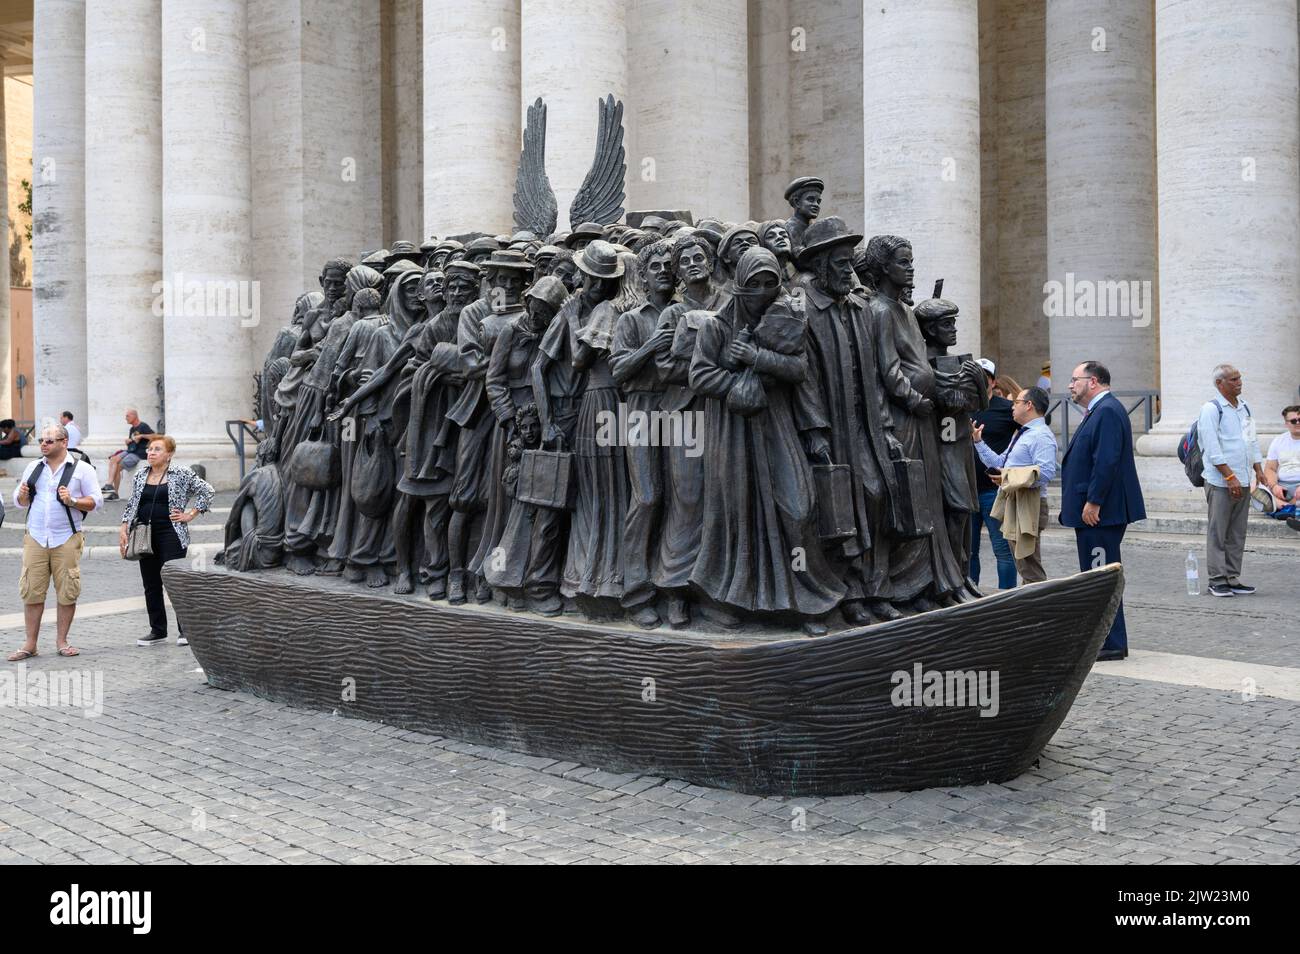 The sculpture “Angels Unawares” by Canadian artist Timothy P. Schmalz in St Peter’s Square in the Vatican. Stock Photo